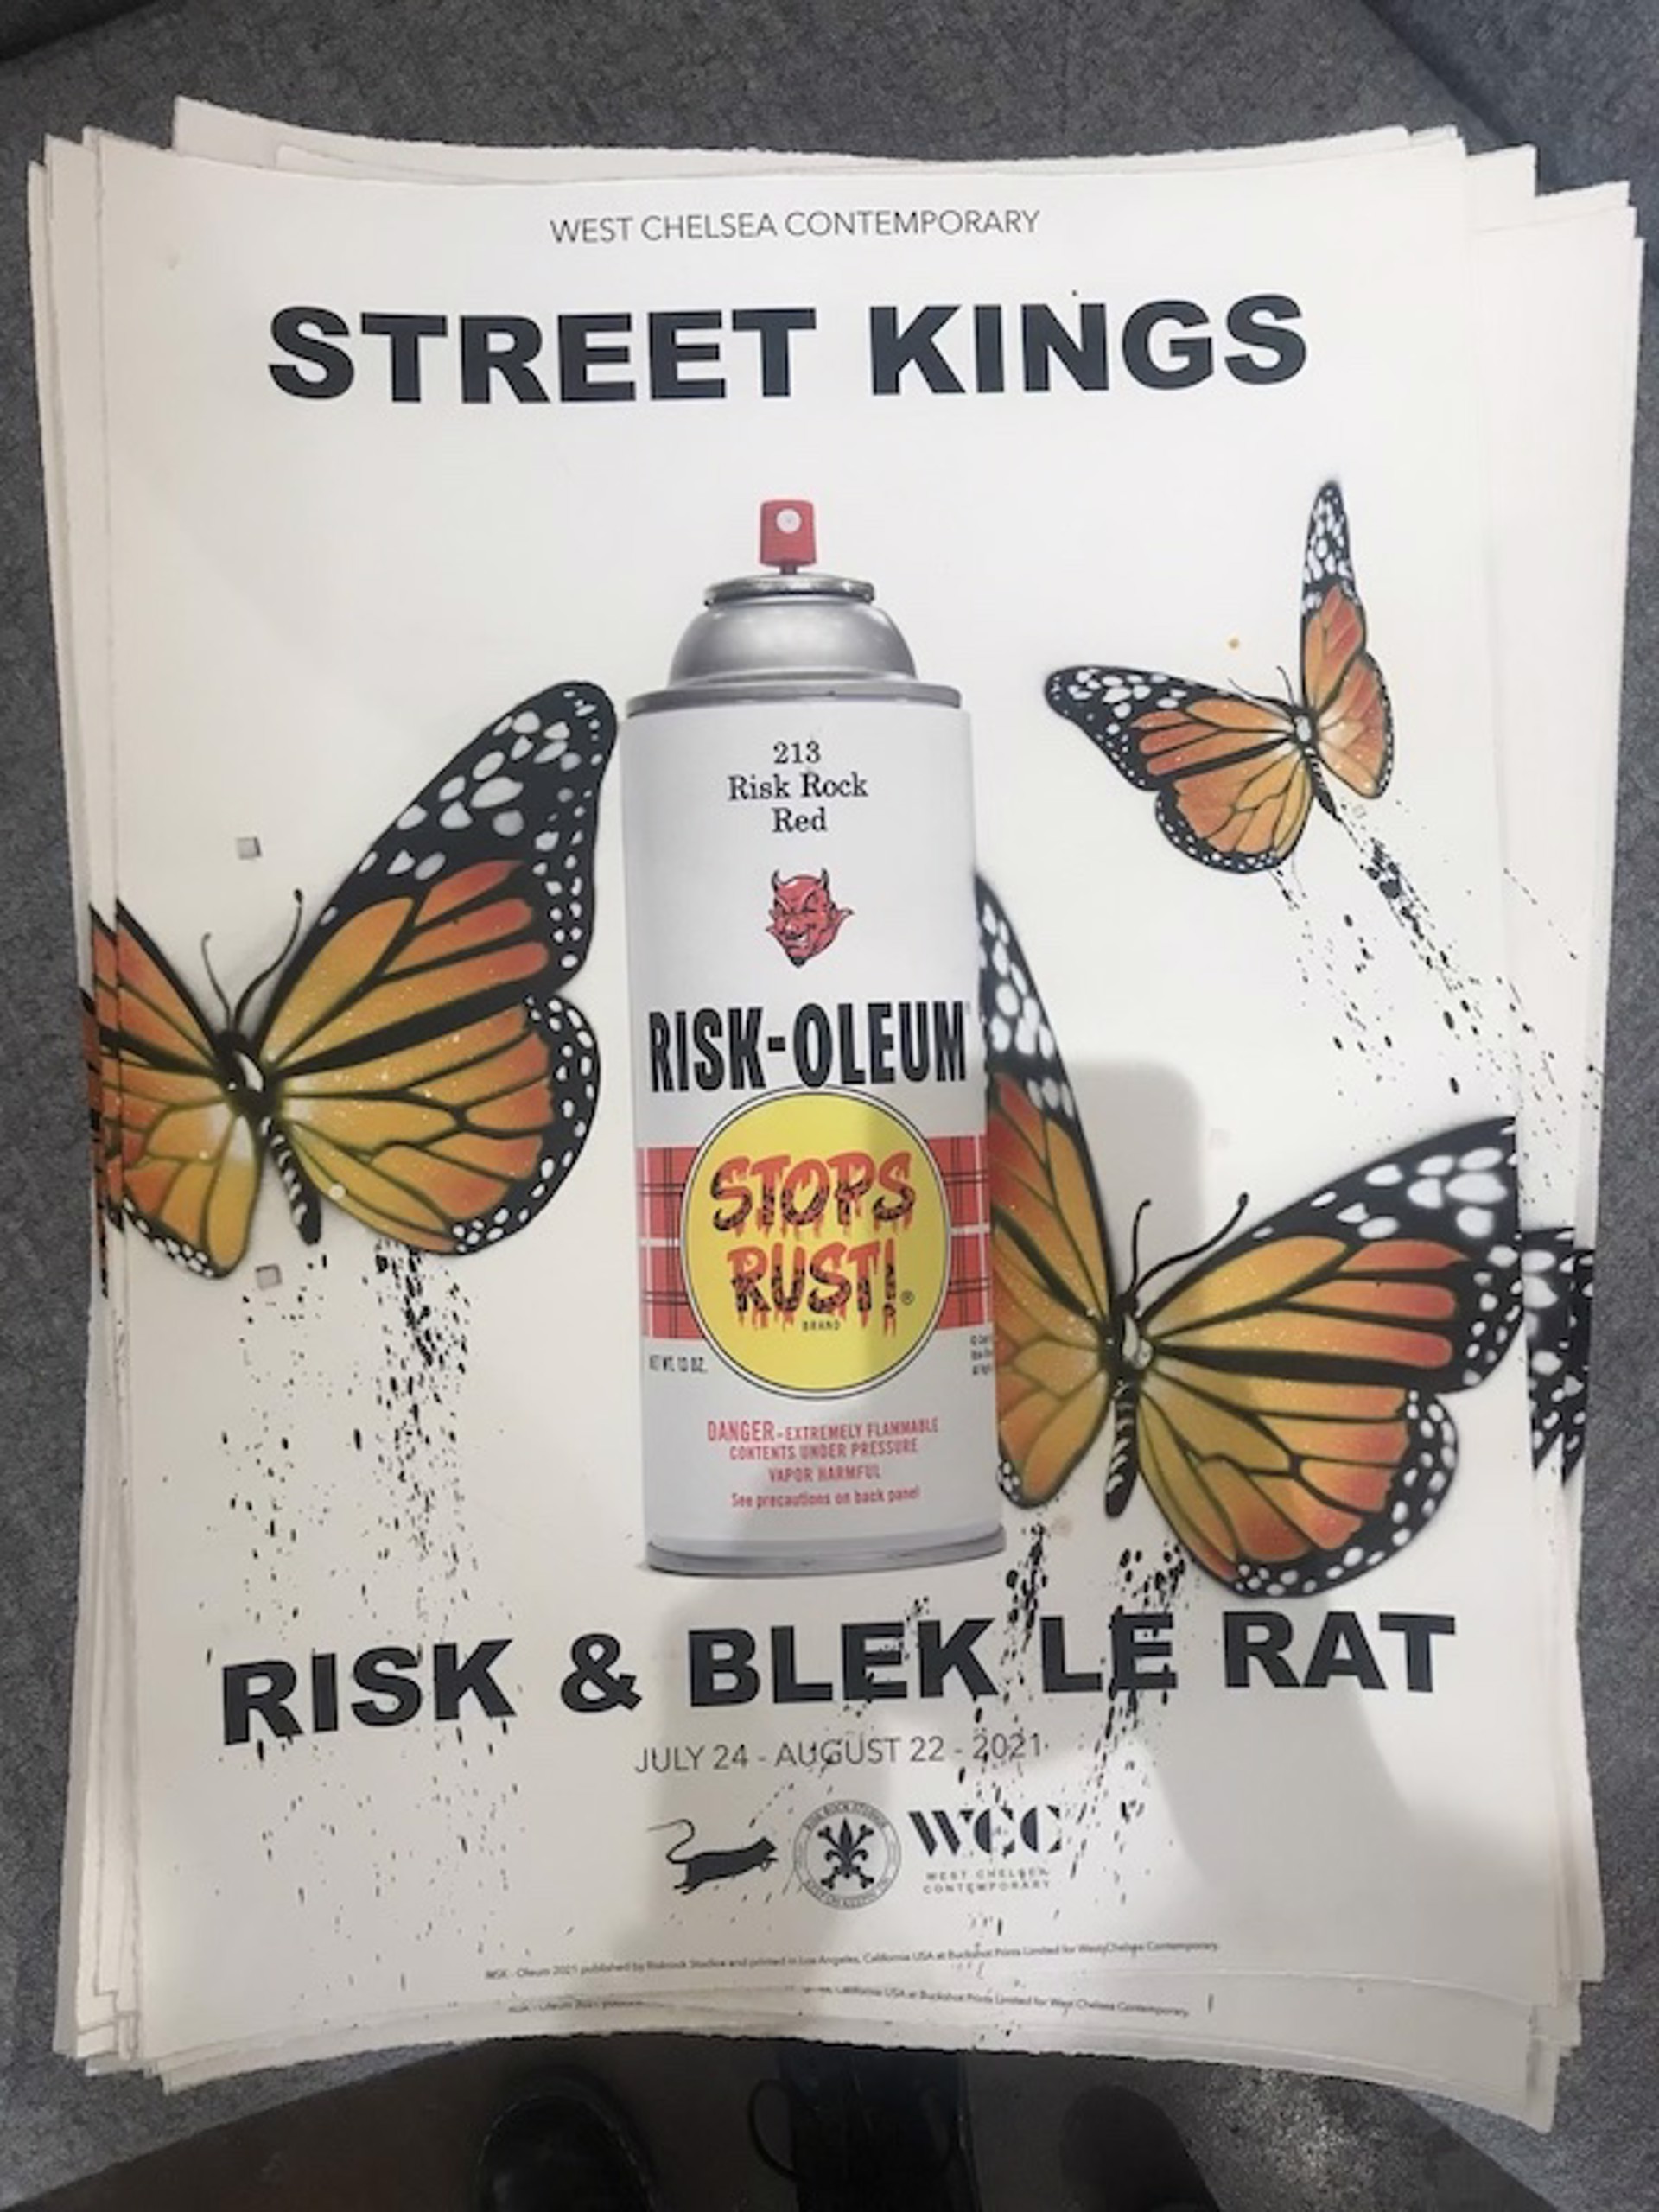 Street Kings Show Print (29/50) by Risk